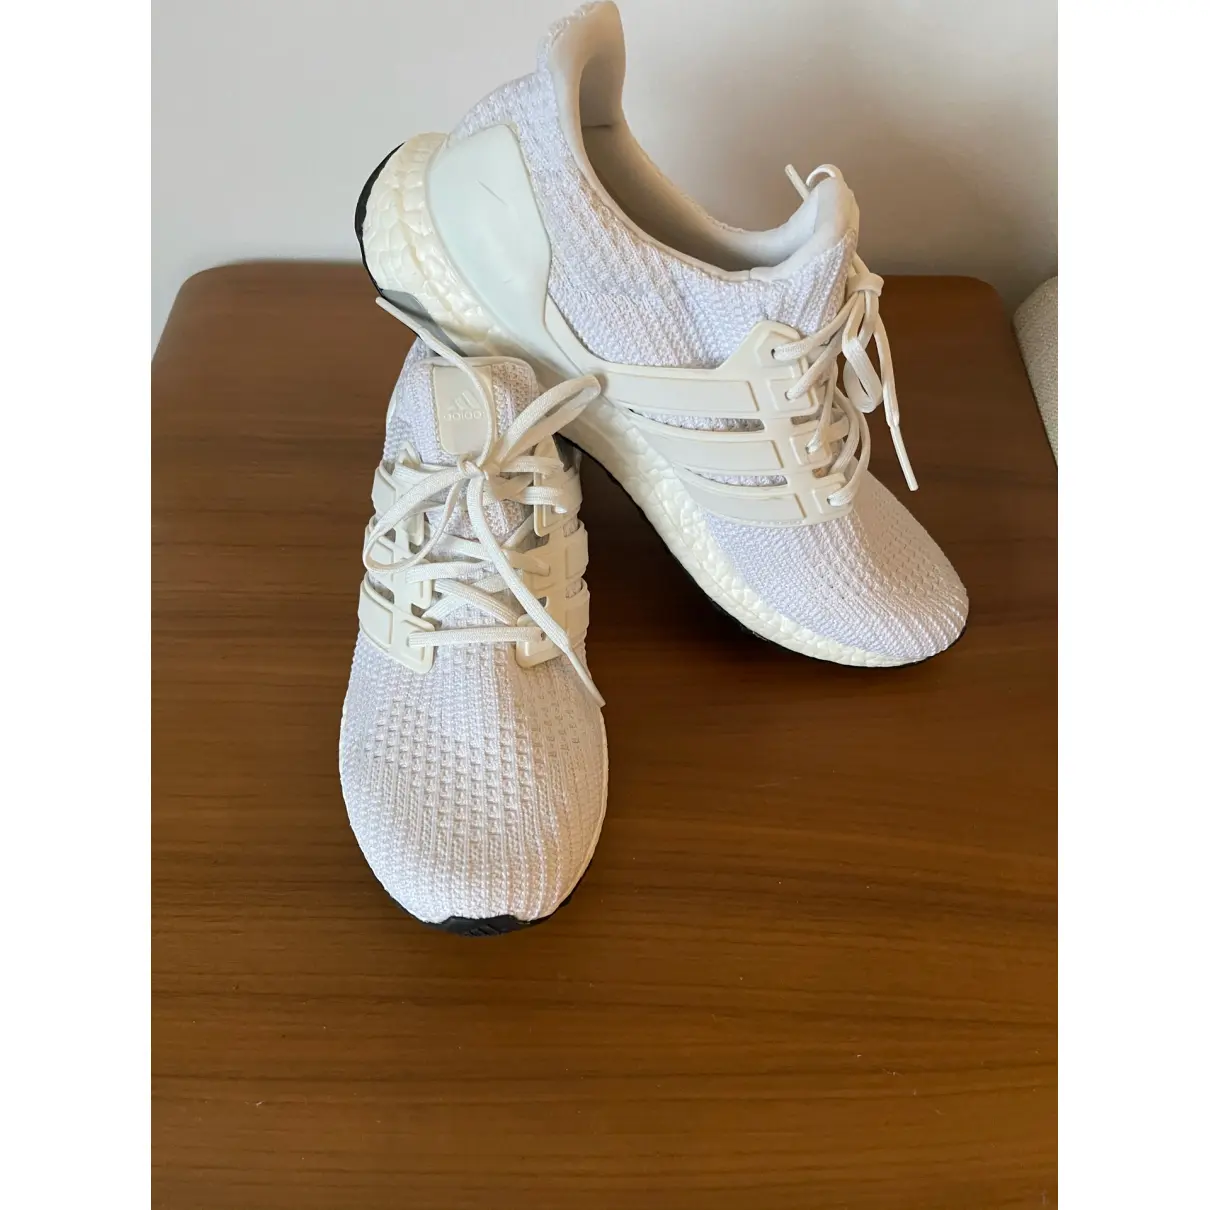 Buy Adidas Ultraboost cloth low trainers online